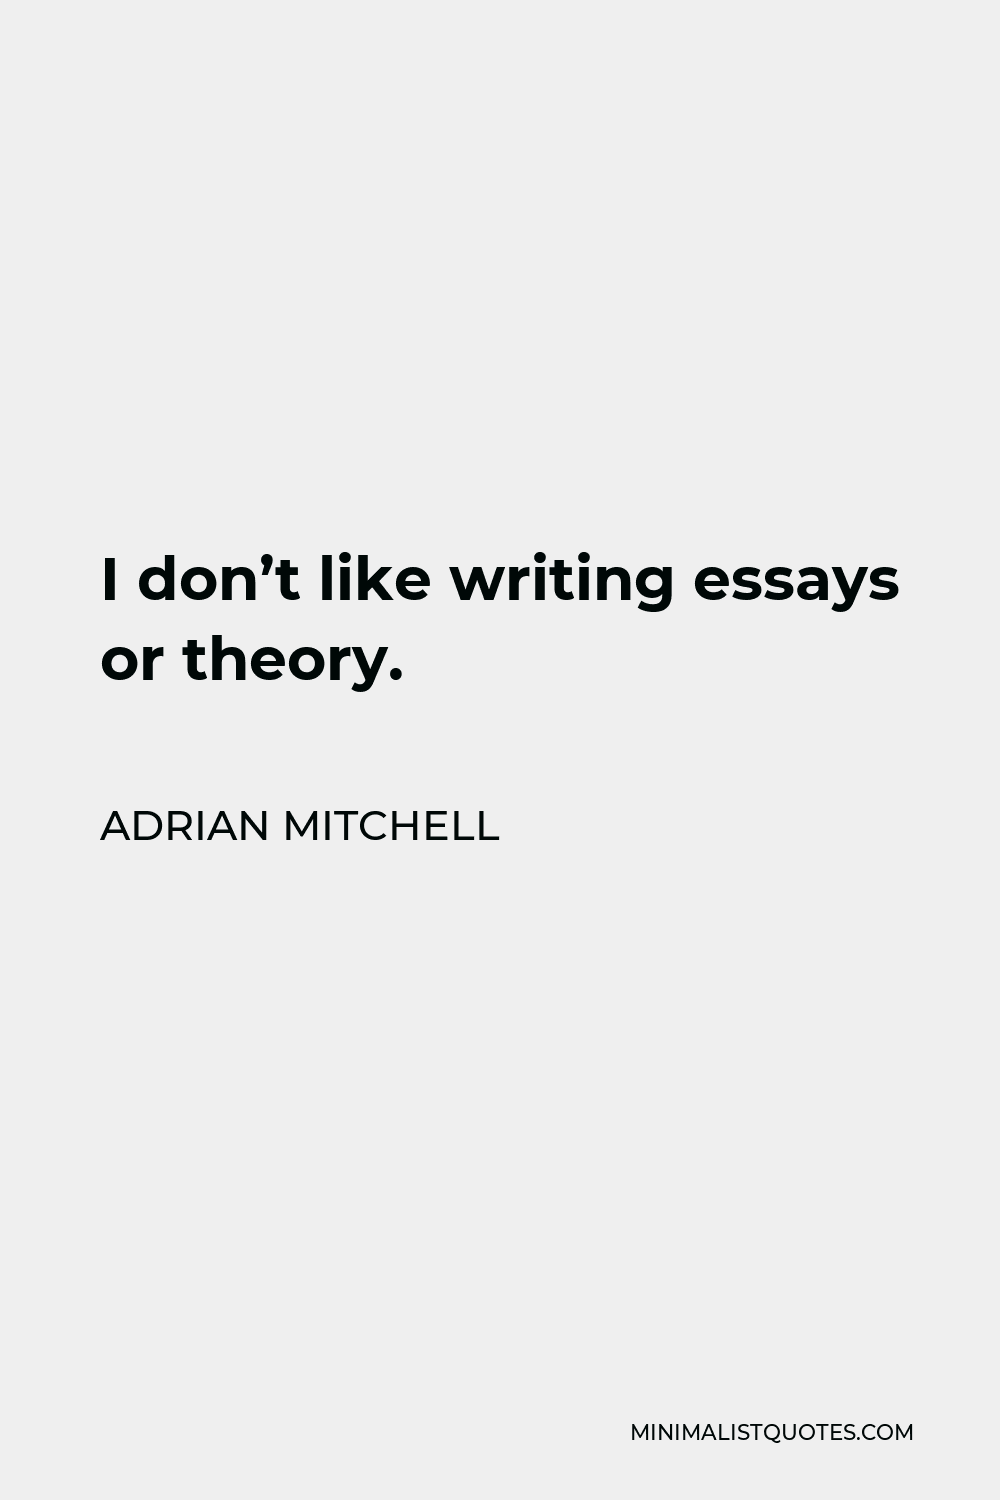 Adrian Mitchell Quote - I don’t like writing essays or theory.